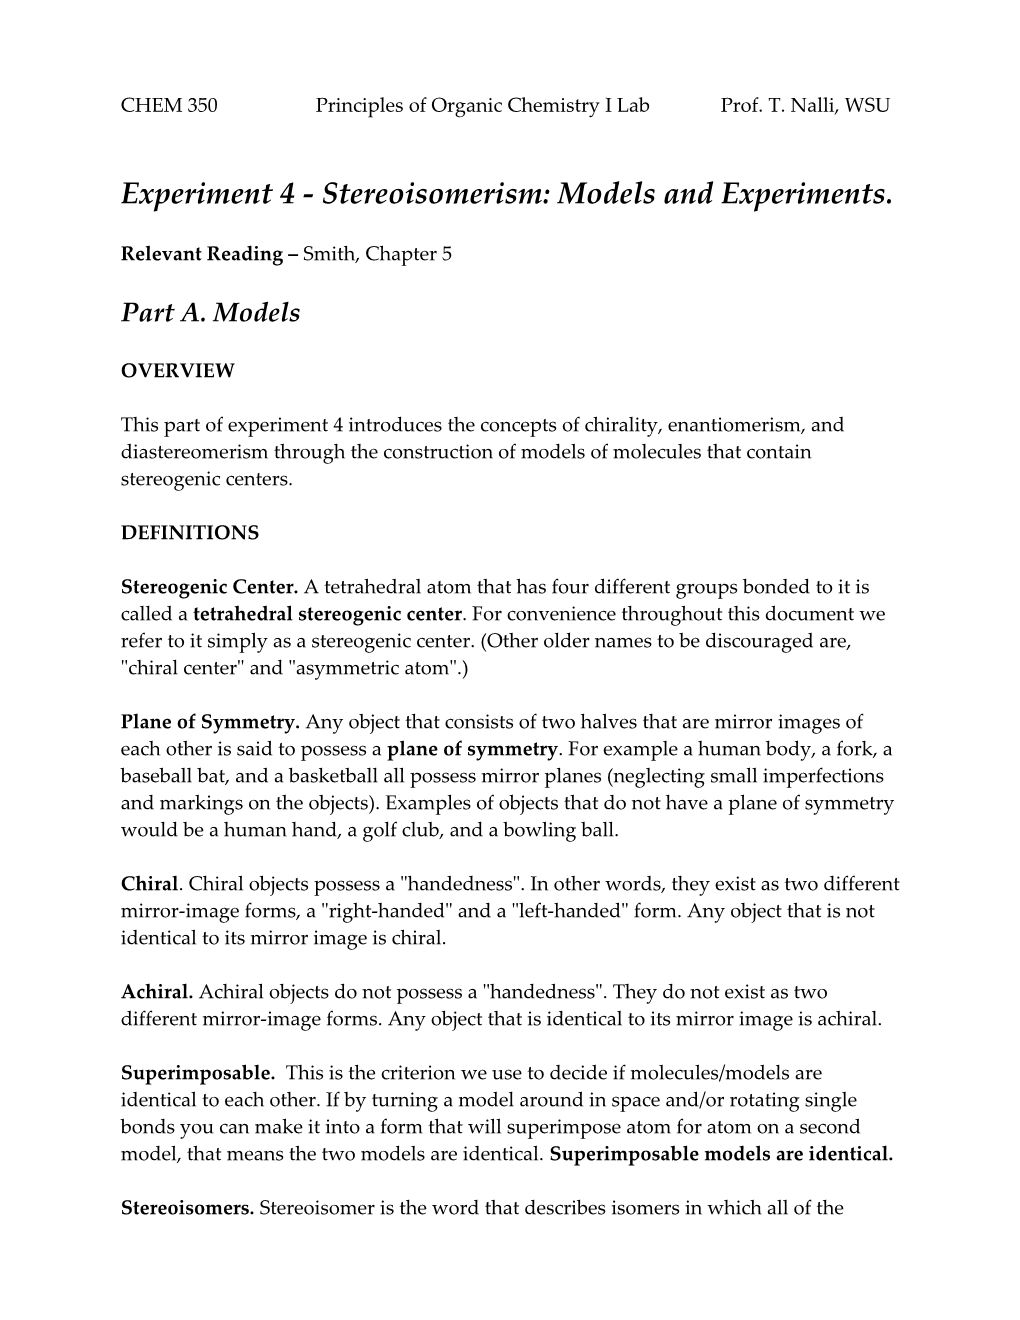 Experiment 4 - Stereoisomerism: Models and Experiments